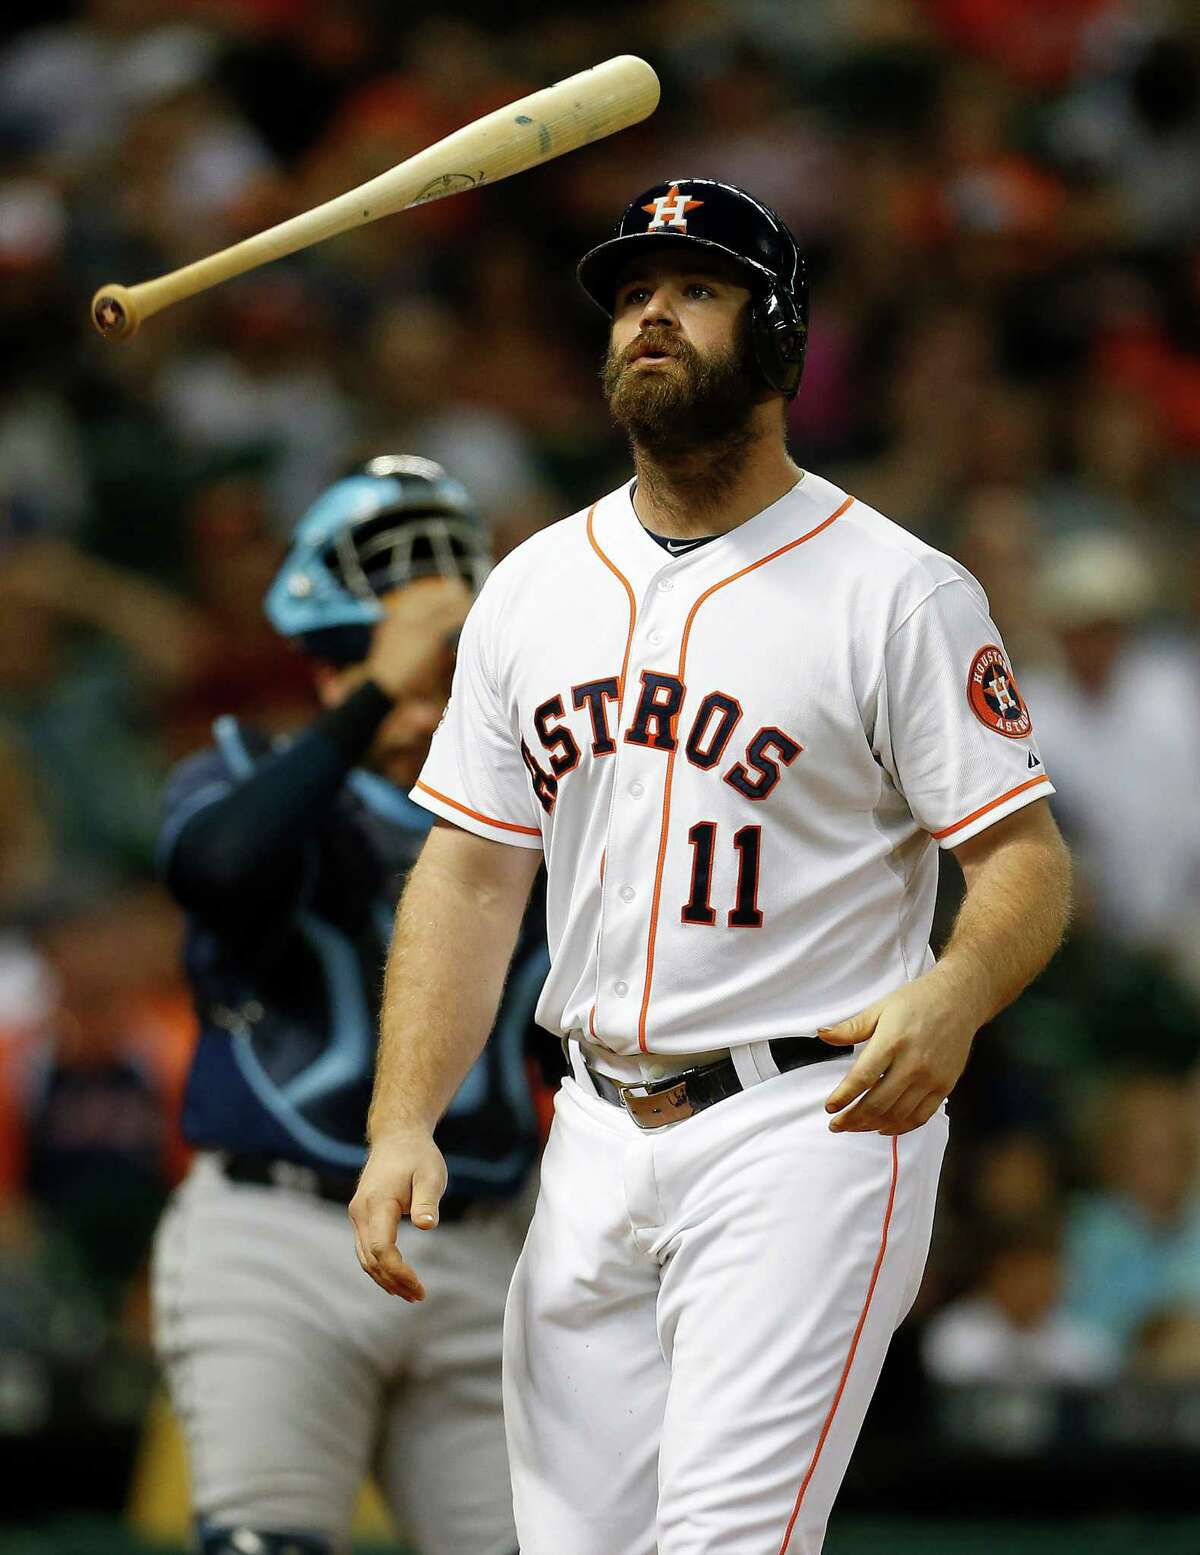 The only action Evan Gattis' bat got was a midair twirl following one of his two strikeouts Thursday night. The Astros had 11 strikeouts and only one hit.